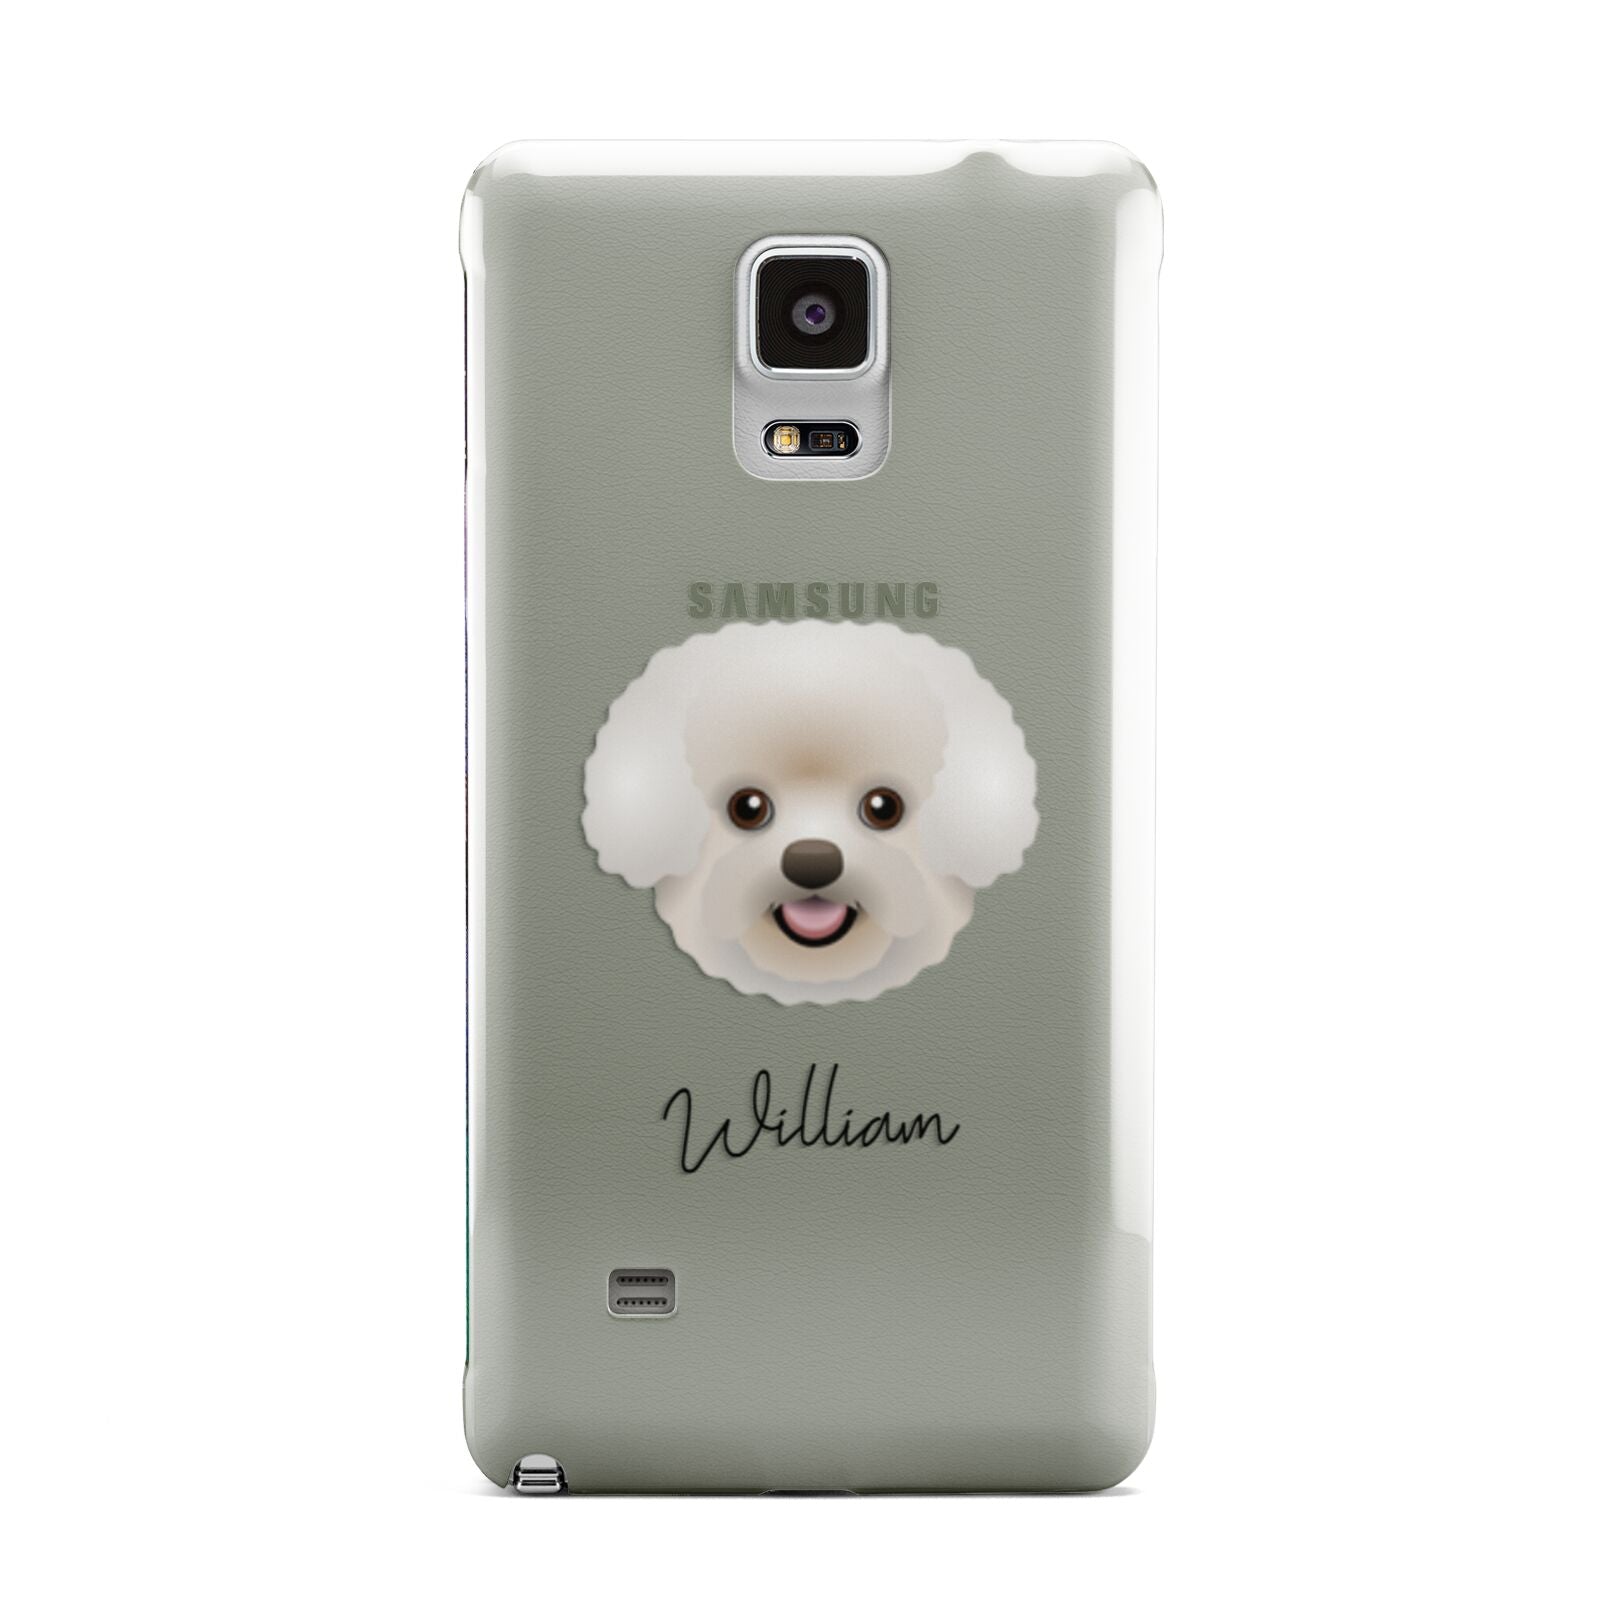 Bichon Frise Personalised Samsung Galaxy Note 4 Case